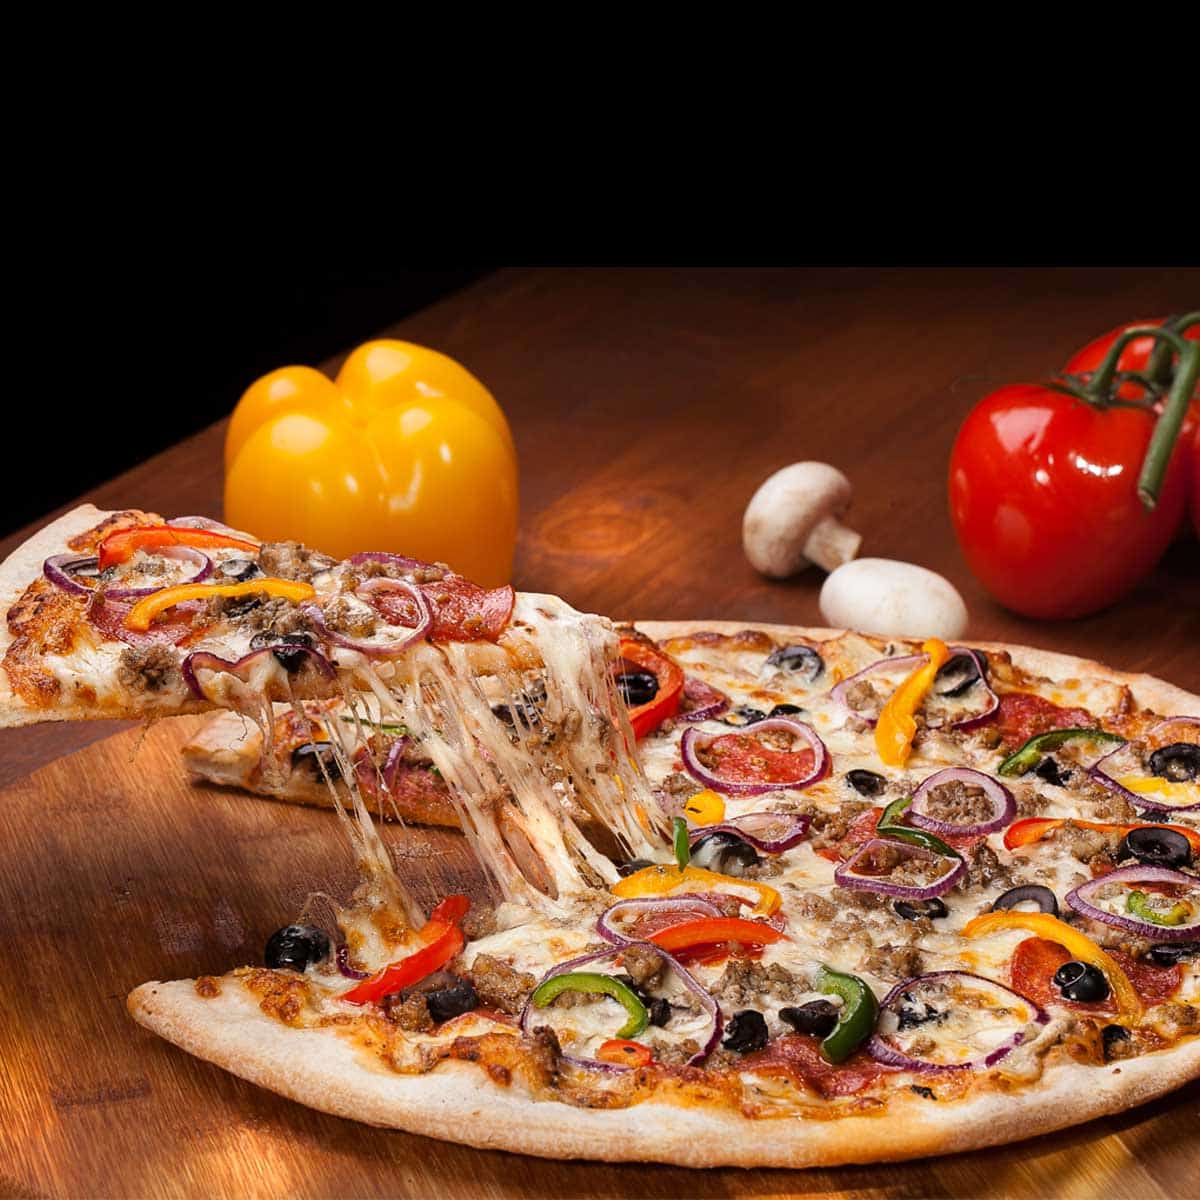 A whole loaded topping pizza on a platter with one slice being pulled out showing the strings of cheese.